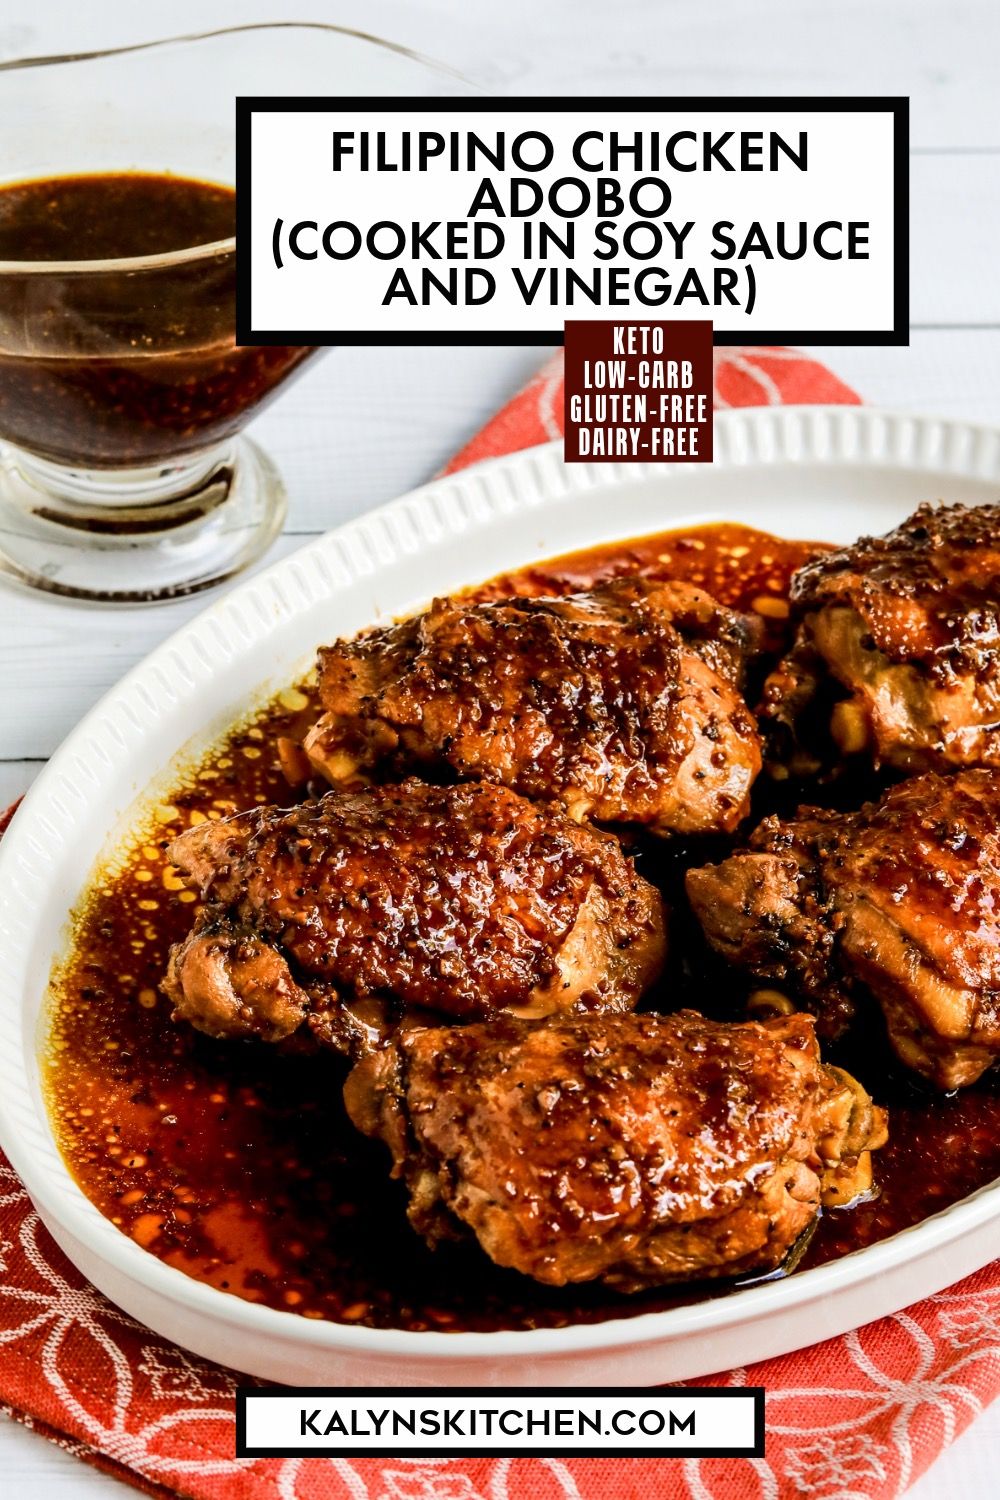 Pinterest image for Filipino Chicken Adobo (cooked in soy sauce and vinegar.)